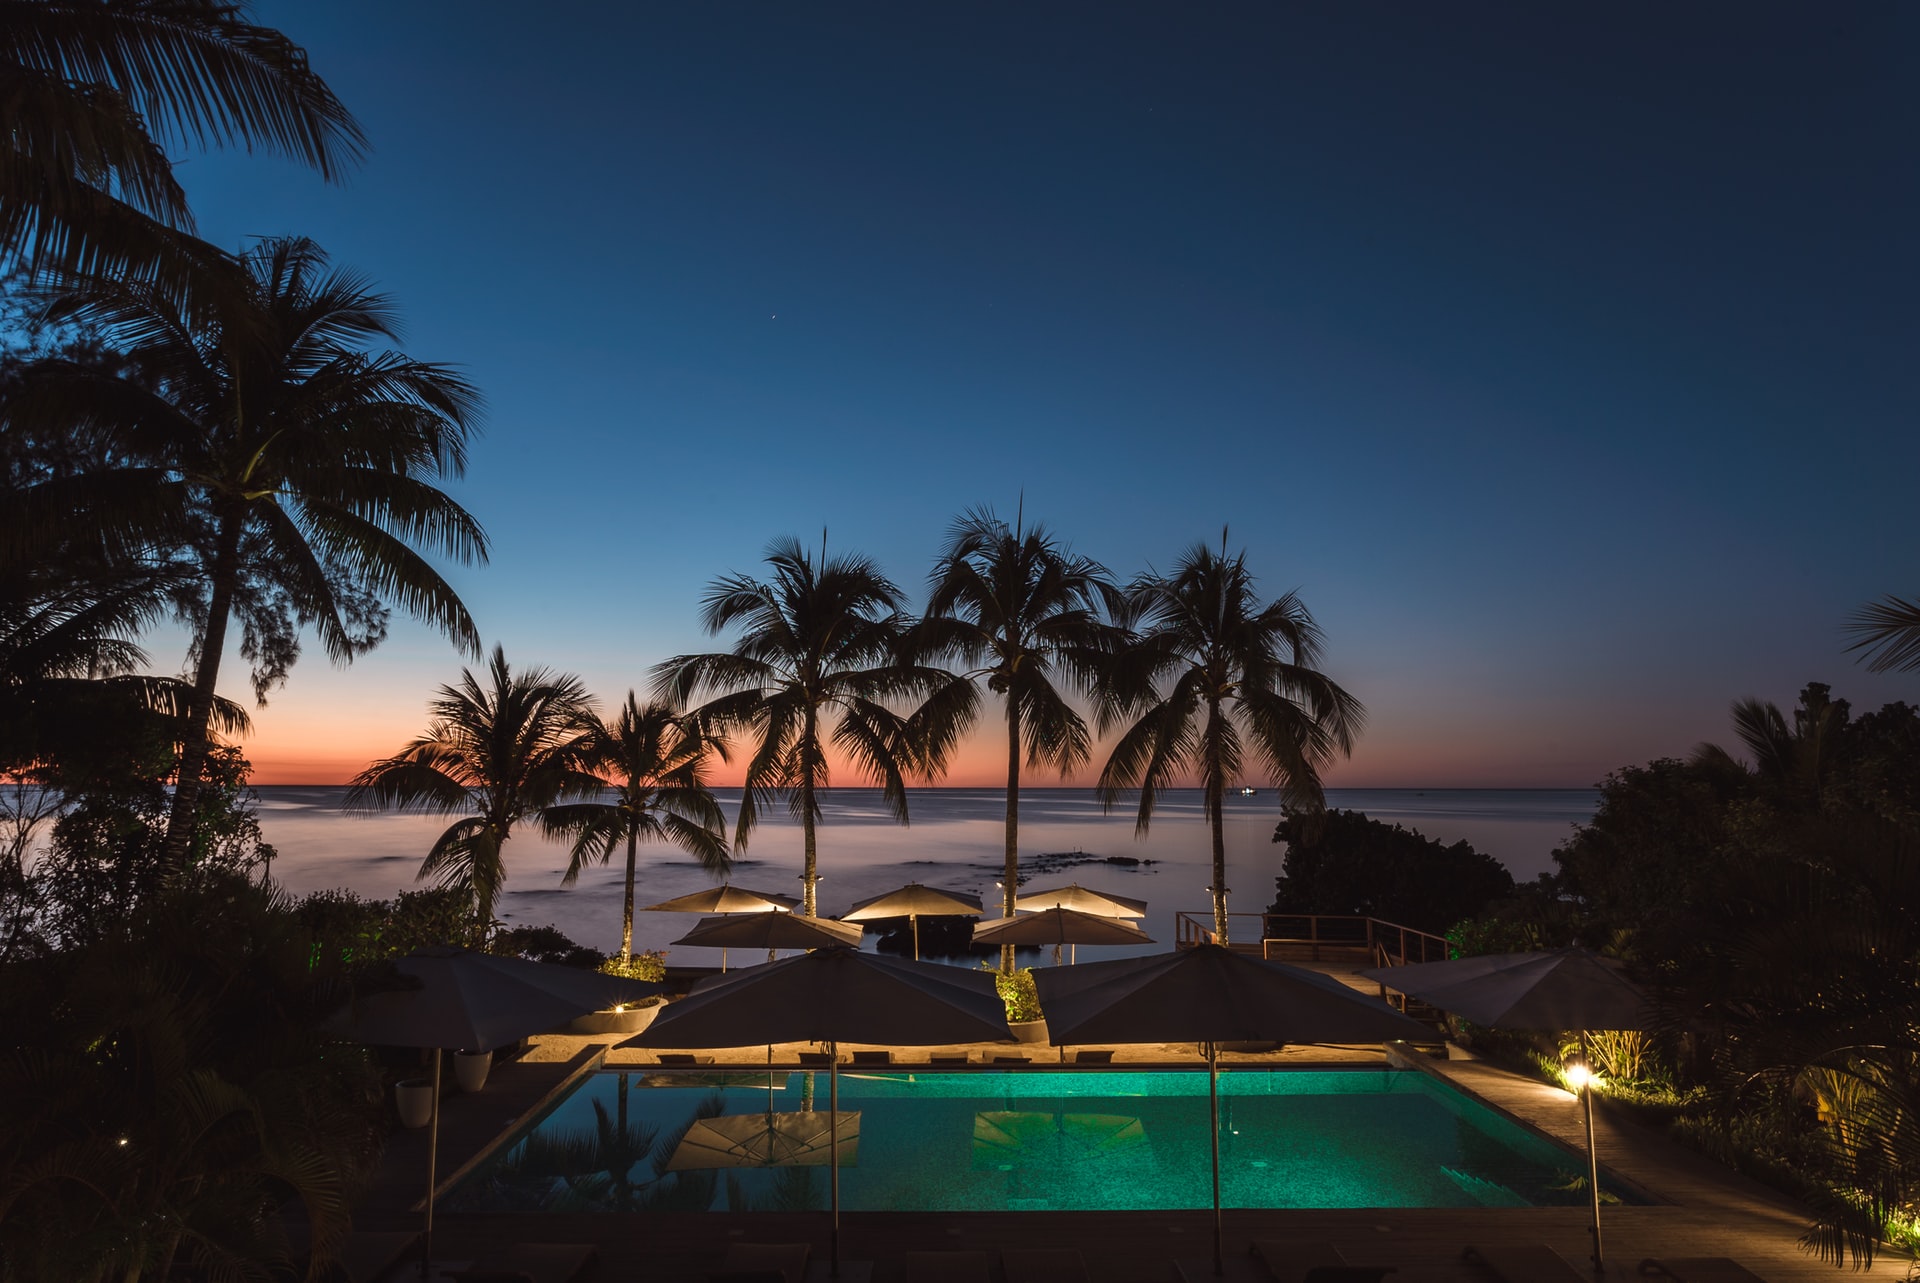 Swimming pool and parasols lit up under palm trees as dusk falls on island resort